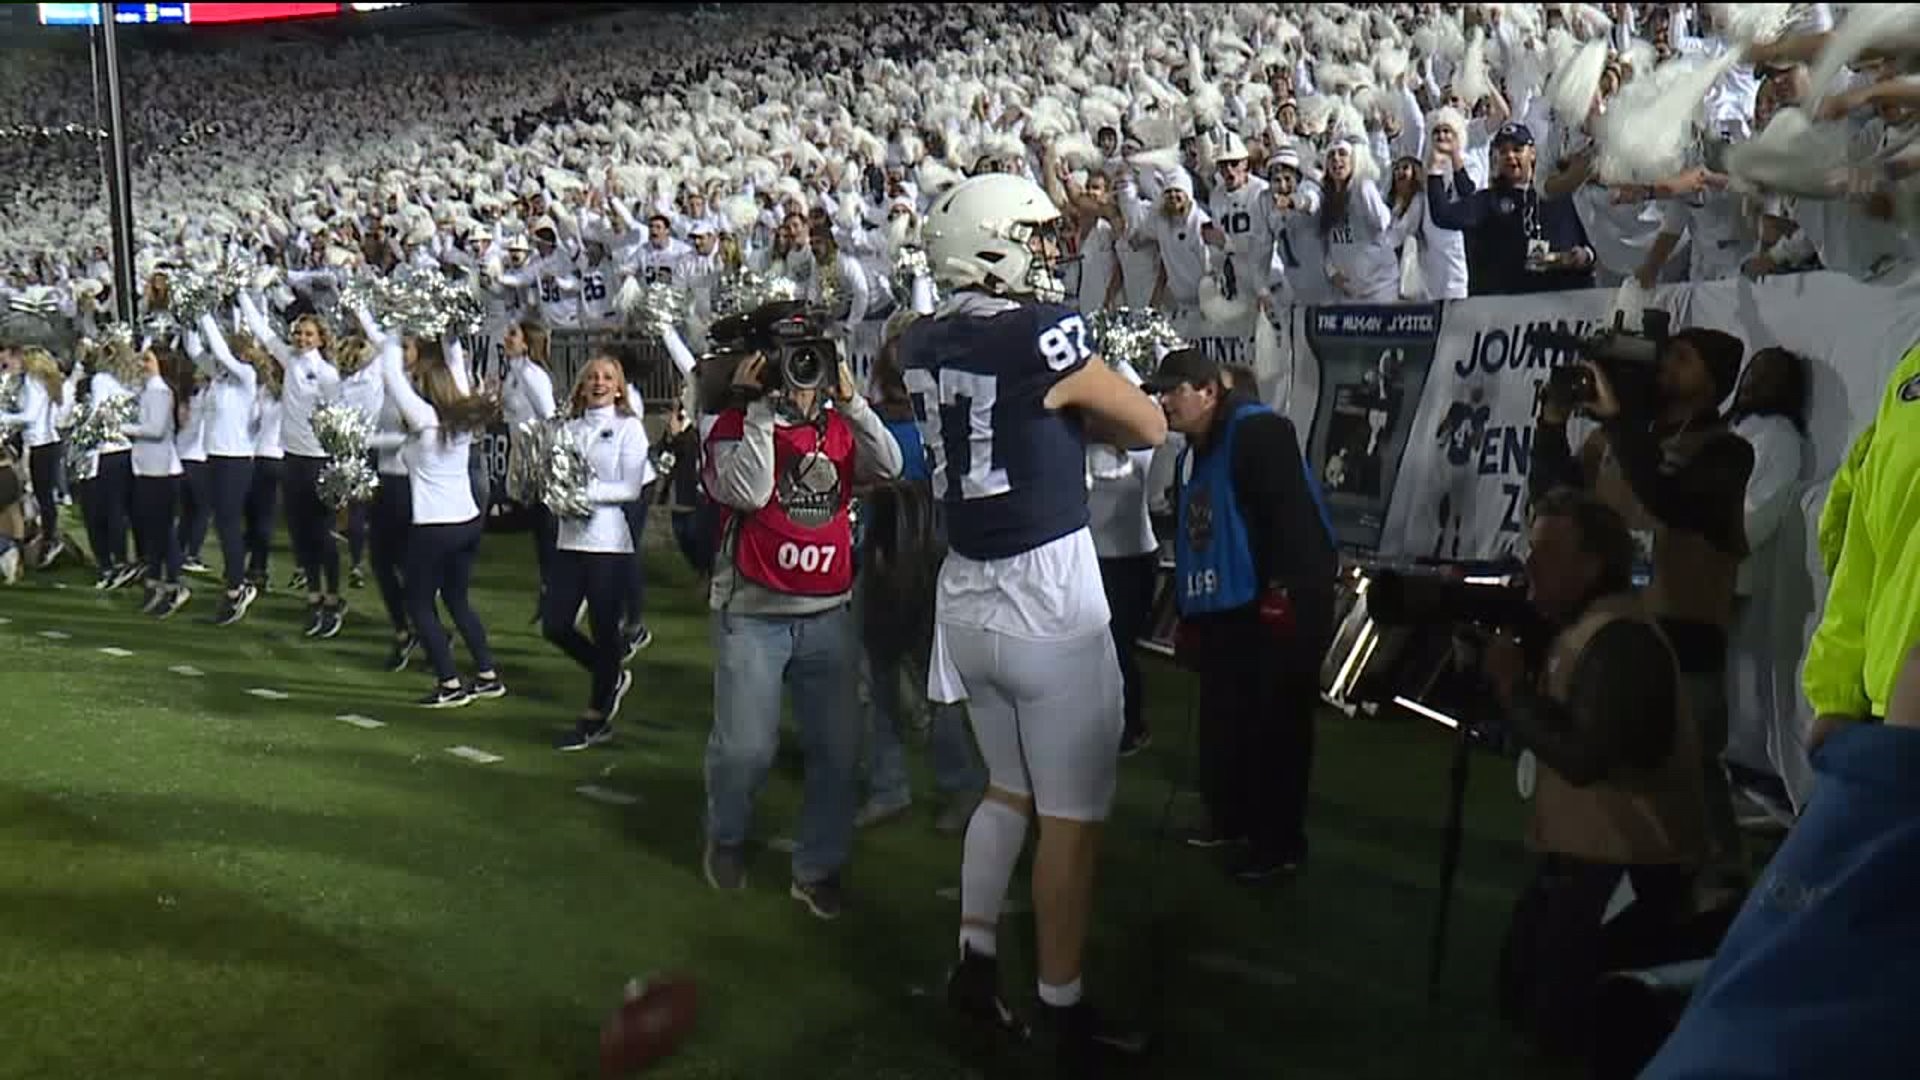 Nittany Lions Offense Ready to Roar in Cotton Bowl